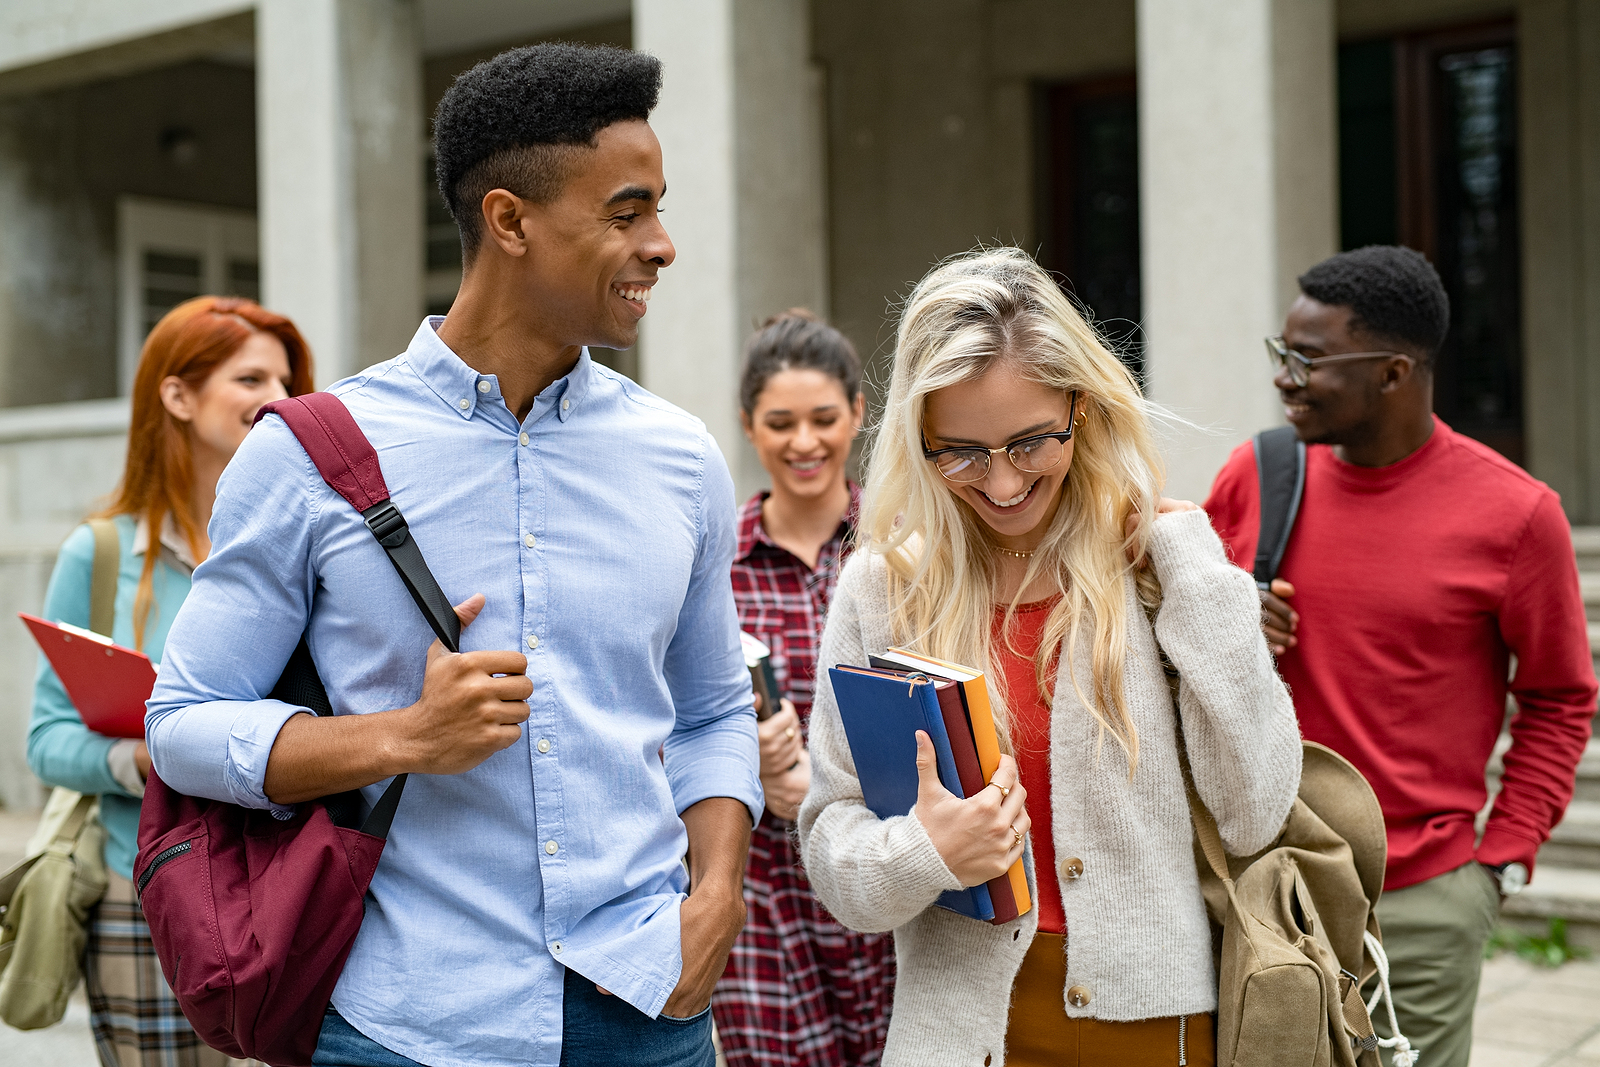 A group of young multi ethnic students walk to class with their backpacks. At the front is a guy and girl flirting with eachother, laughing together.